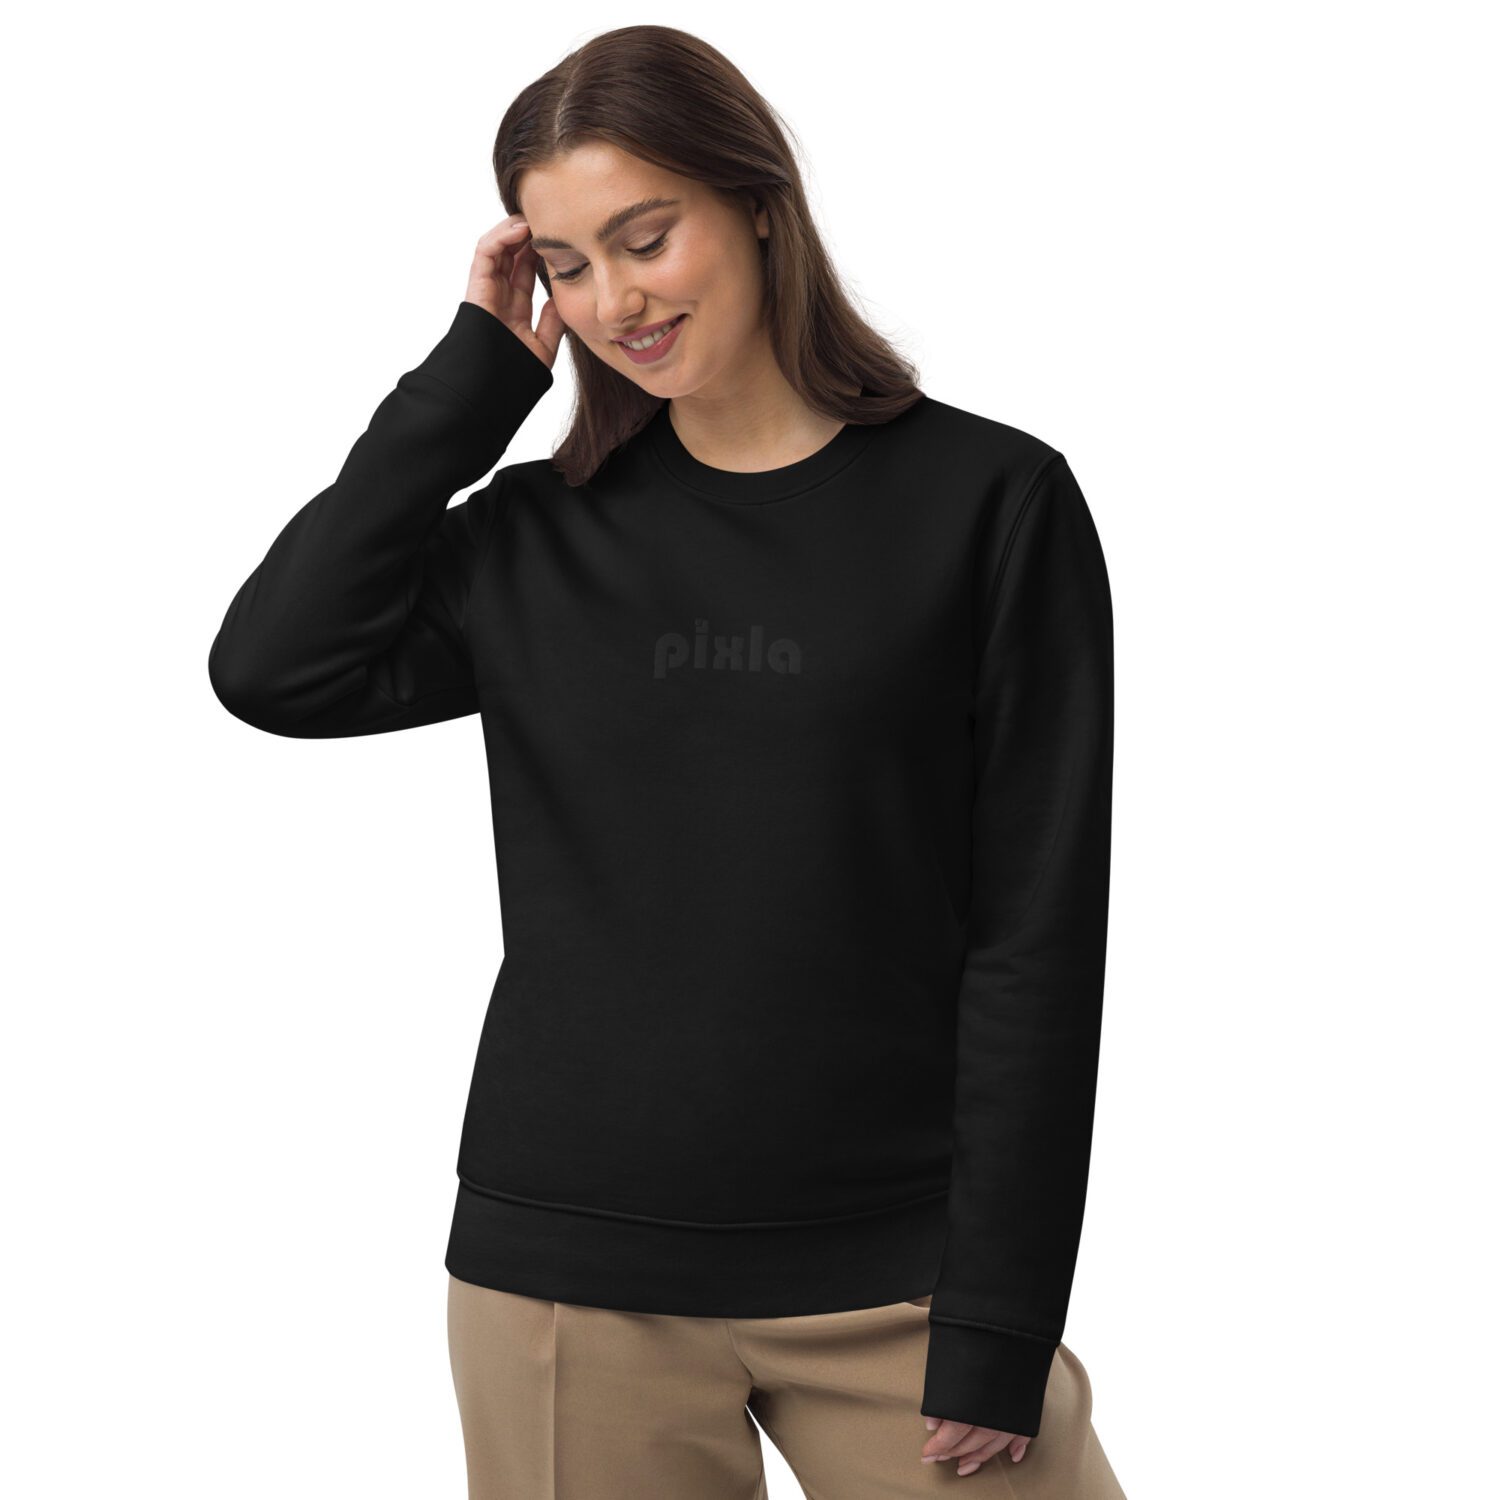 A classic slim-fit black-on-black premium sweatshirt with crispy white embroidery on the front chest. Made from organic ring-spun combed cotton and recycled polyester in medium-weight with a soft feel. Super soft fleece inside making it perfect for keeping warm.